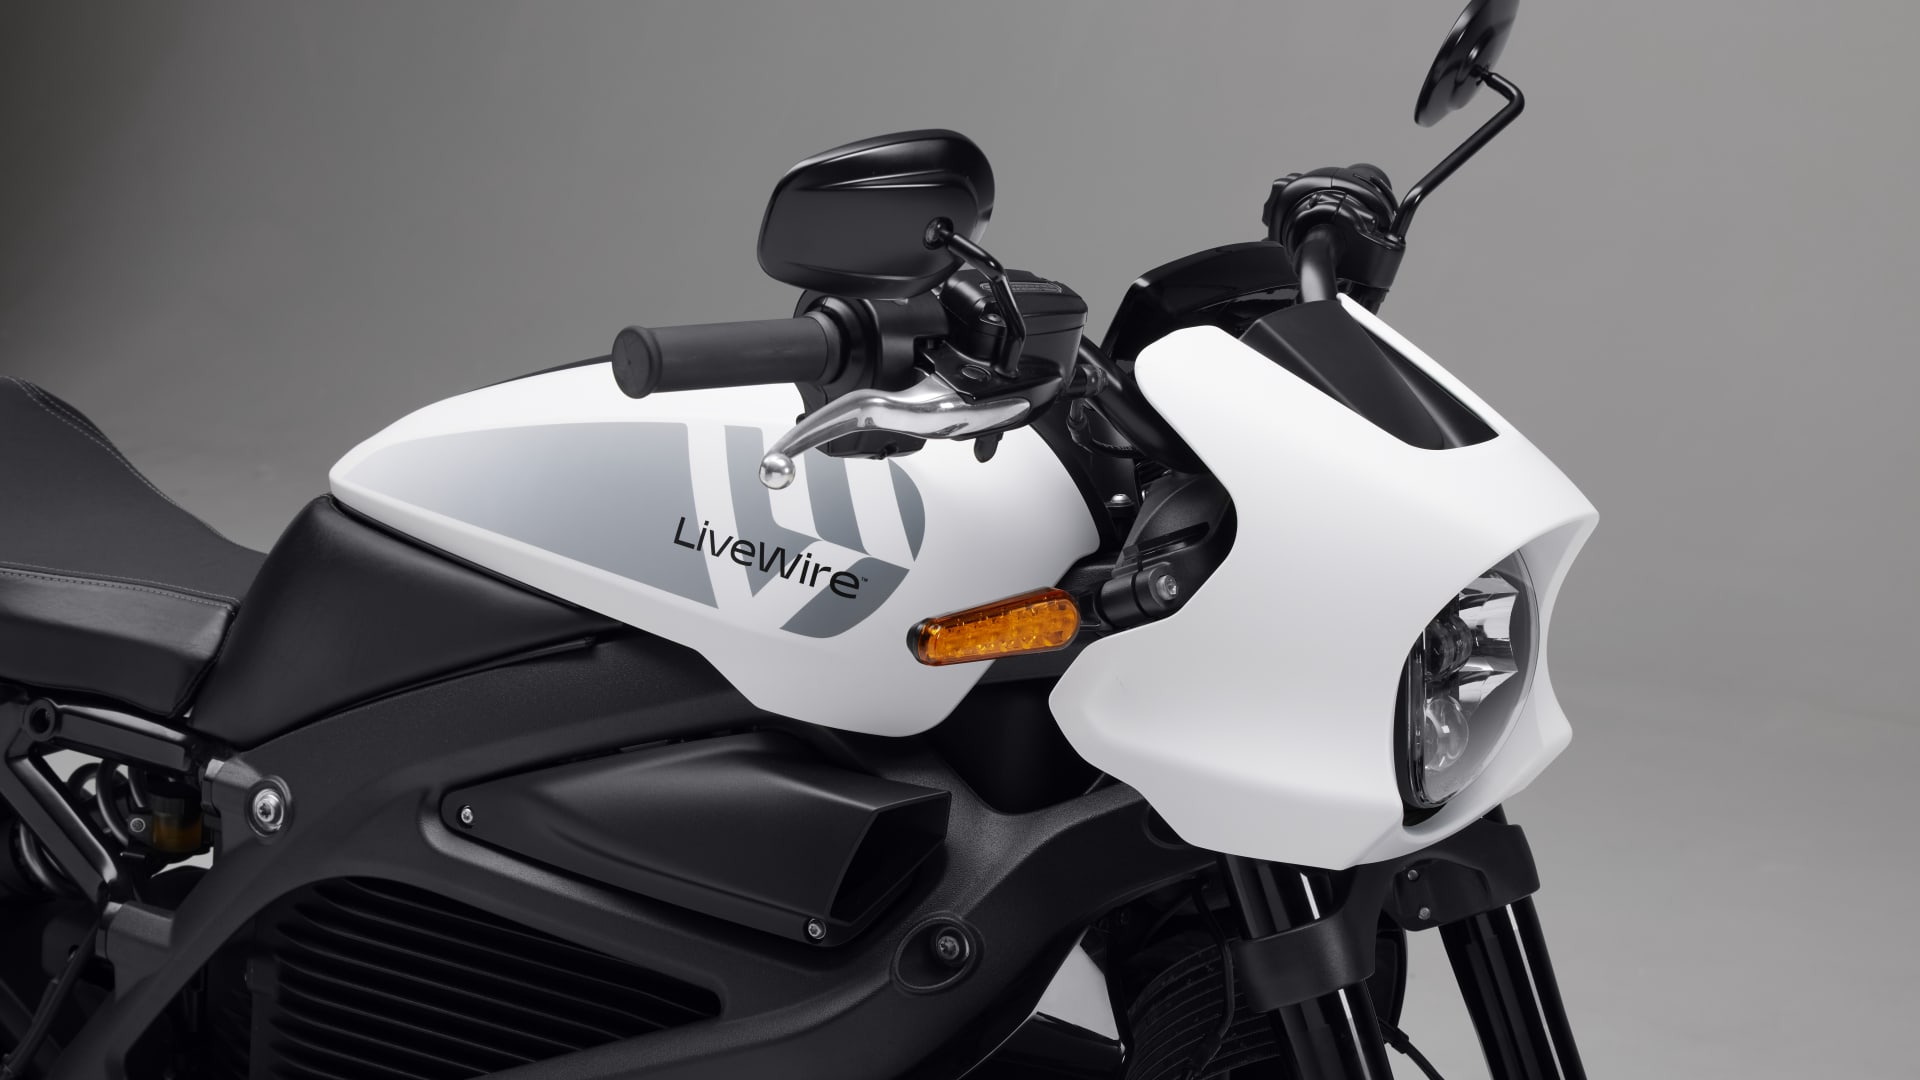 LiveWire motorcycle, which Harley-Davidson announced plans to spin off as a separate EV company through a deal with an ESG-focused SPAC.